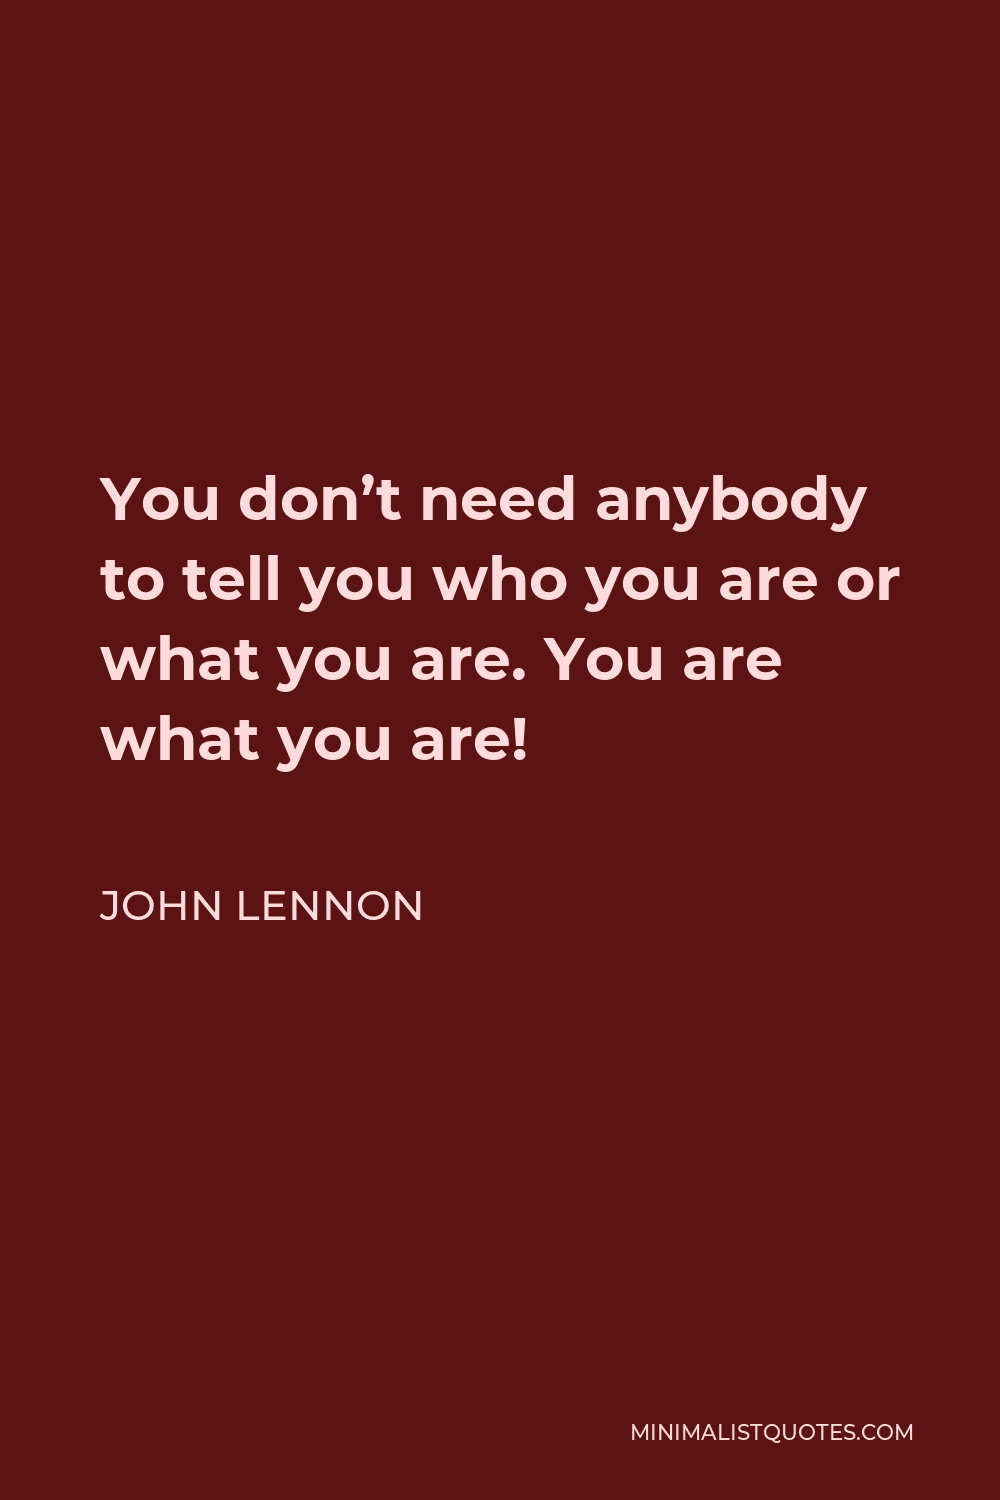 John Lennon Quote - You don’t need anybody to tell you who you are or what you are. You are what you are!